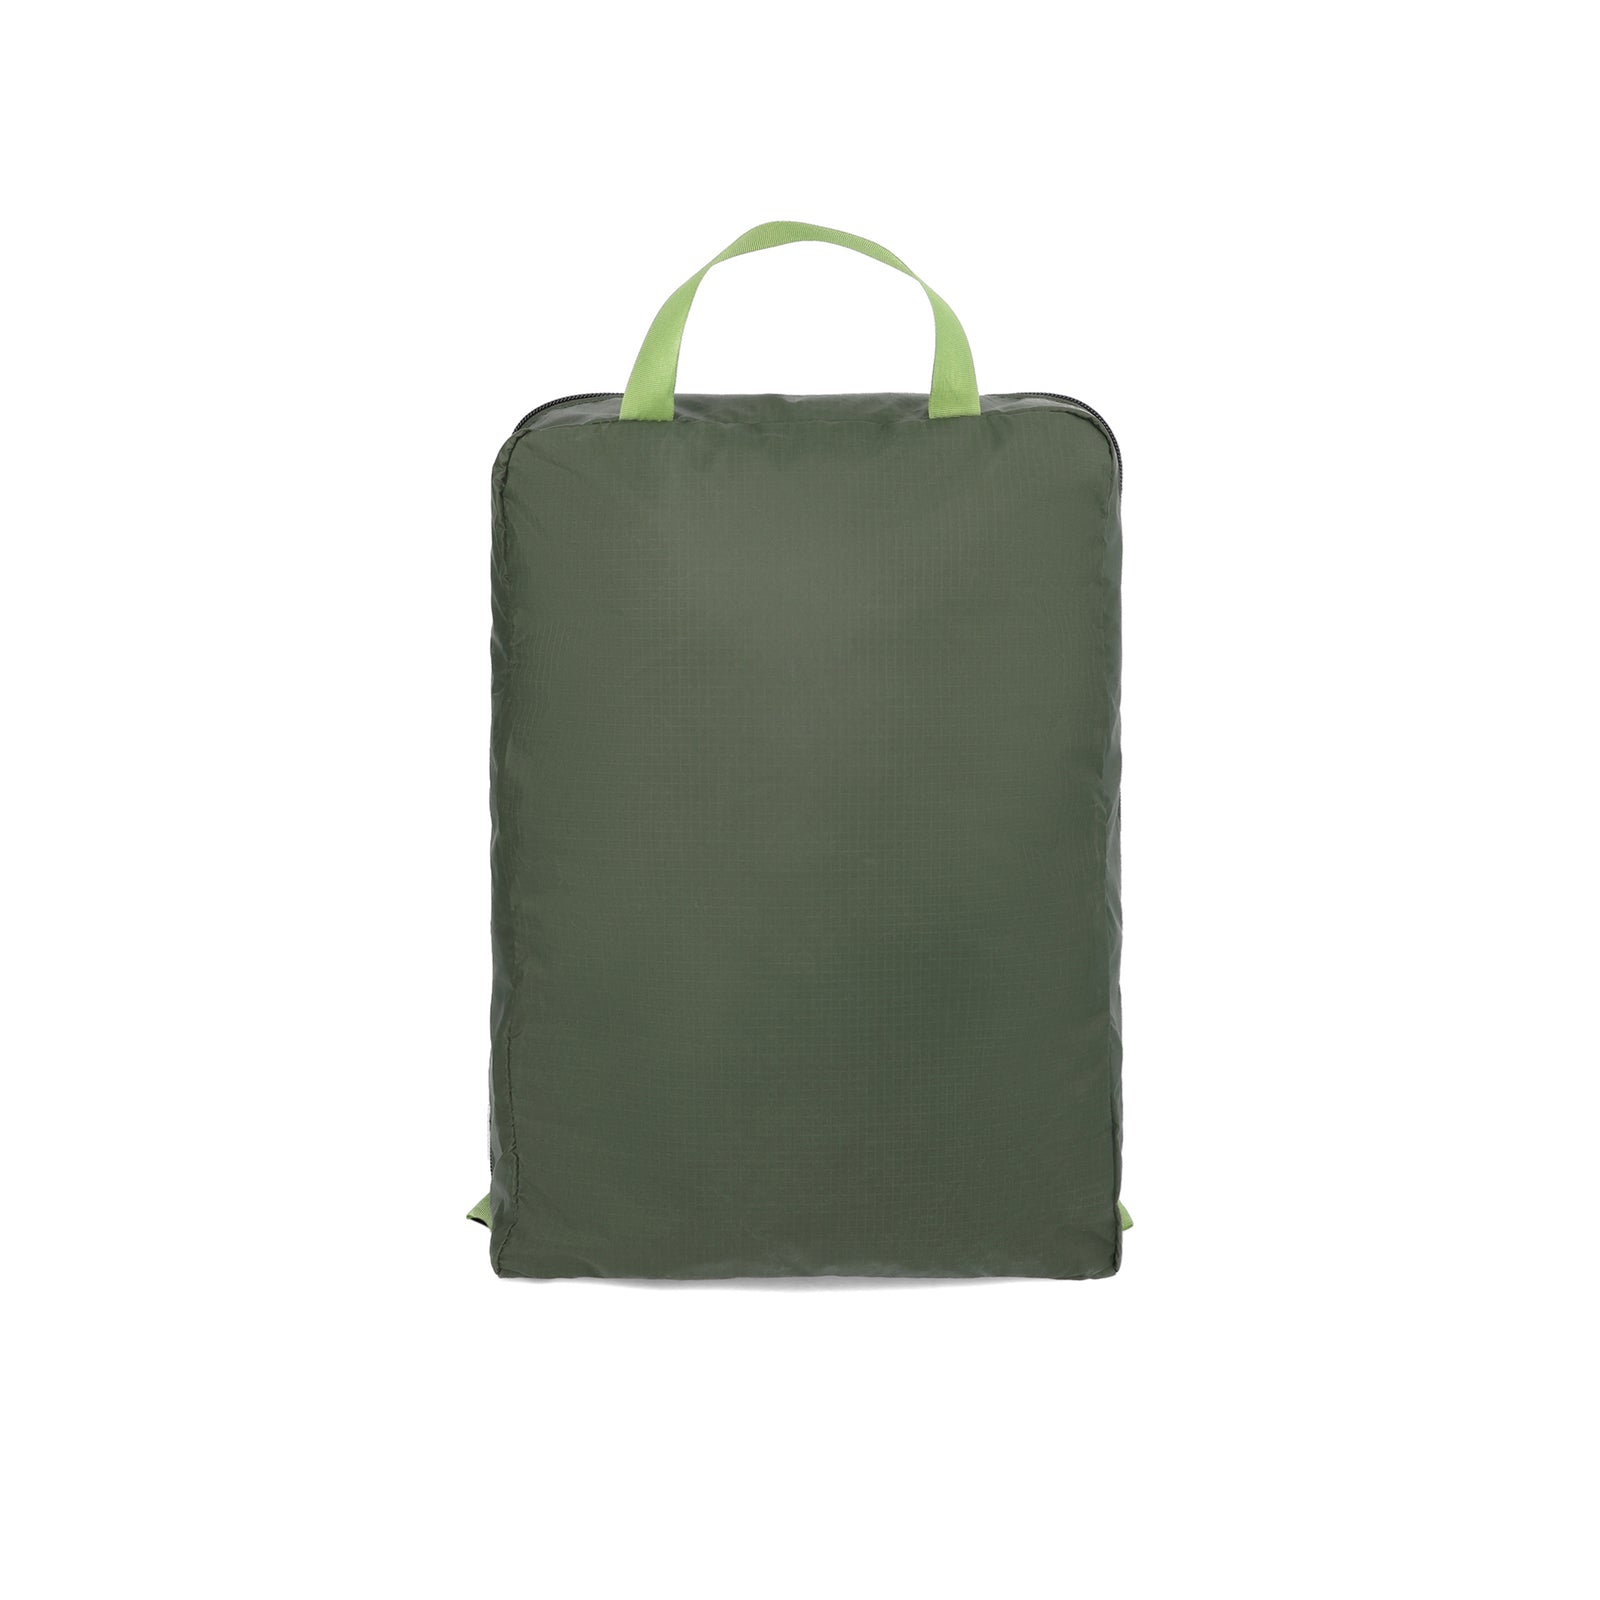 Back of Topo Designs TopoLite 10L Pack Bag ultralight packing cube for travel in "olive" green.